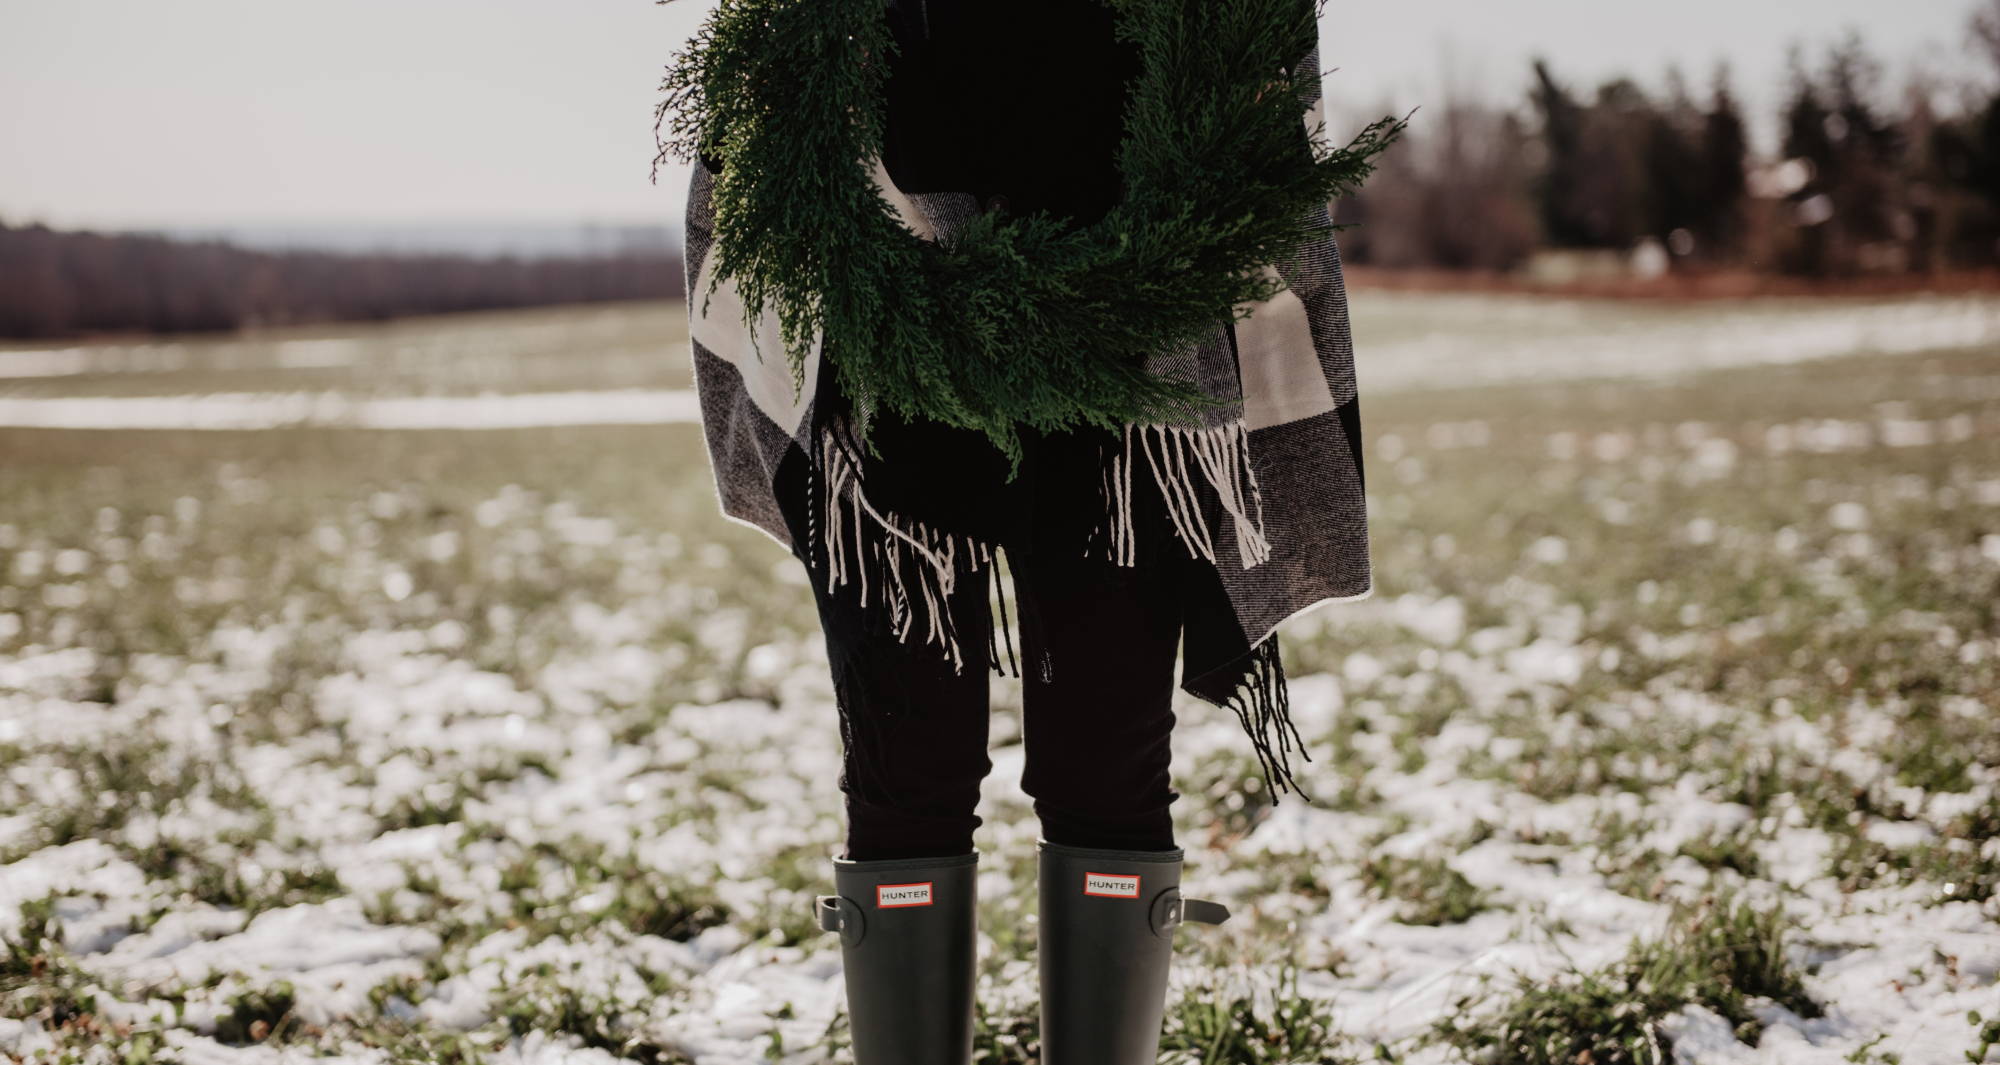 Woman wearing layers of tall black boots, skinny jeans, a cardigan, and a scarf while holding a wreath in the snow.